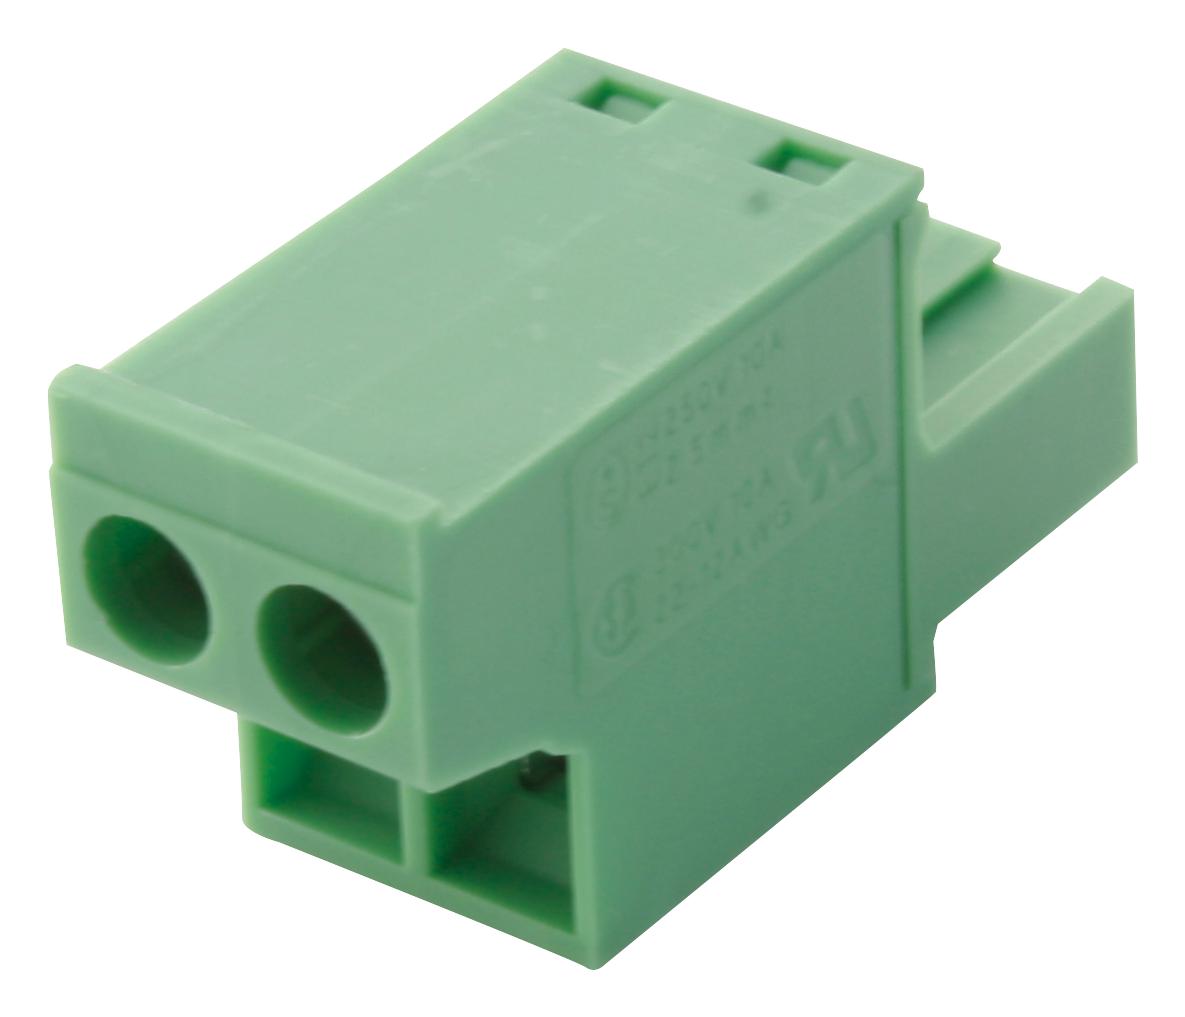 FRONT-MSTB2,5/2-ST-5,08 TERMINAL BLOCK, PLUGGABLE, 2POS, 12AWG PHOENIX CONTACT